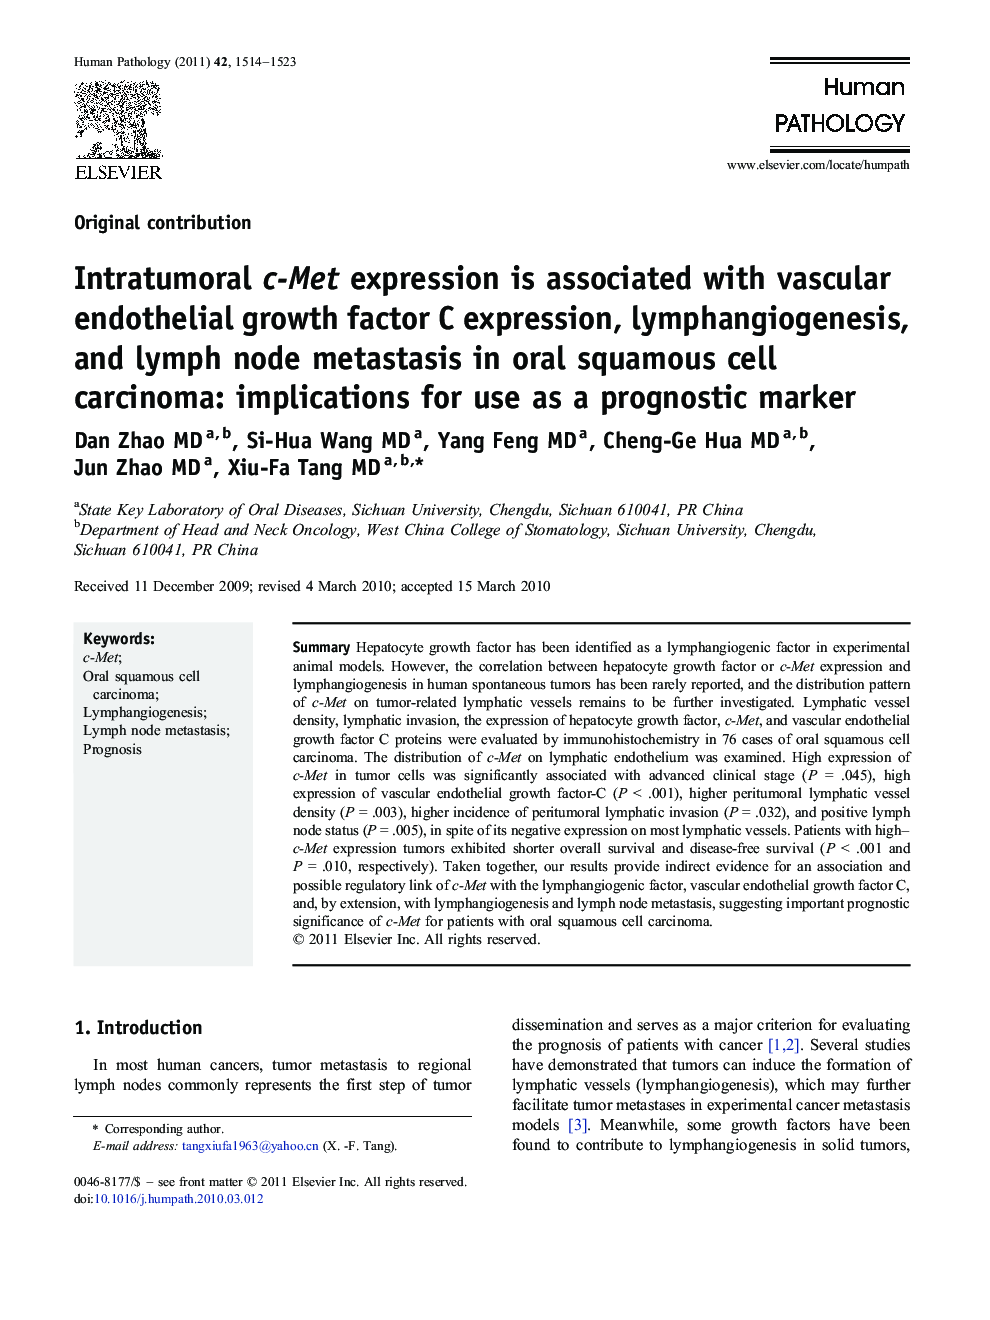 Intratumoral c-Met expression is associated with vascular endothelial growth factor C expression, lymphangiogenesis, and lymph node metastasis in oral squamous cell carcinoma: implications for use as a prognostic marker